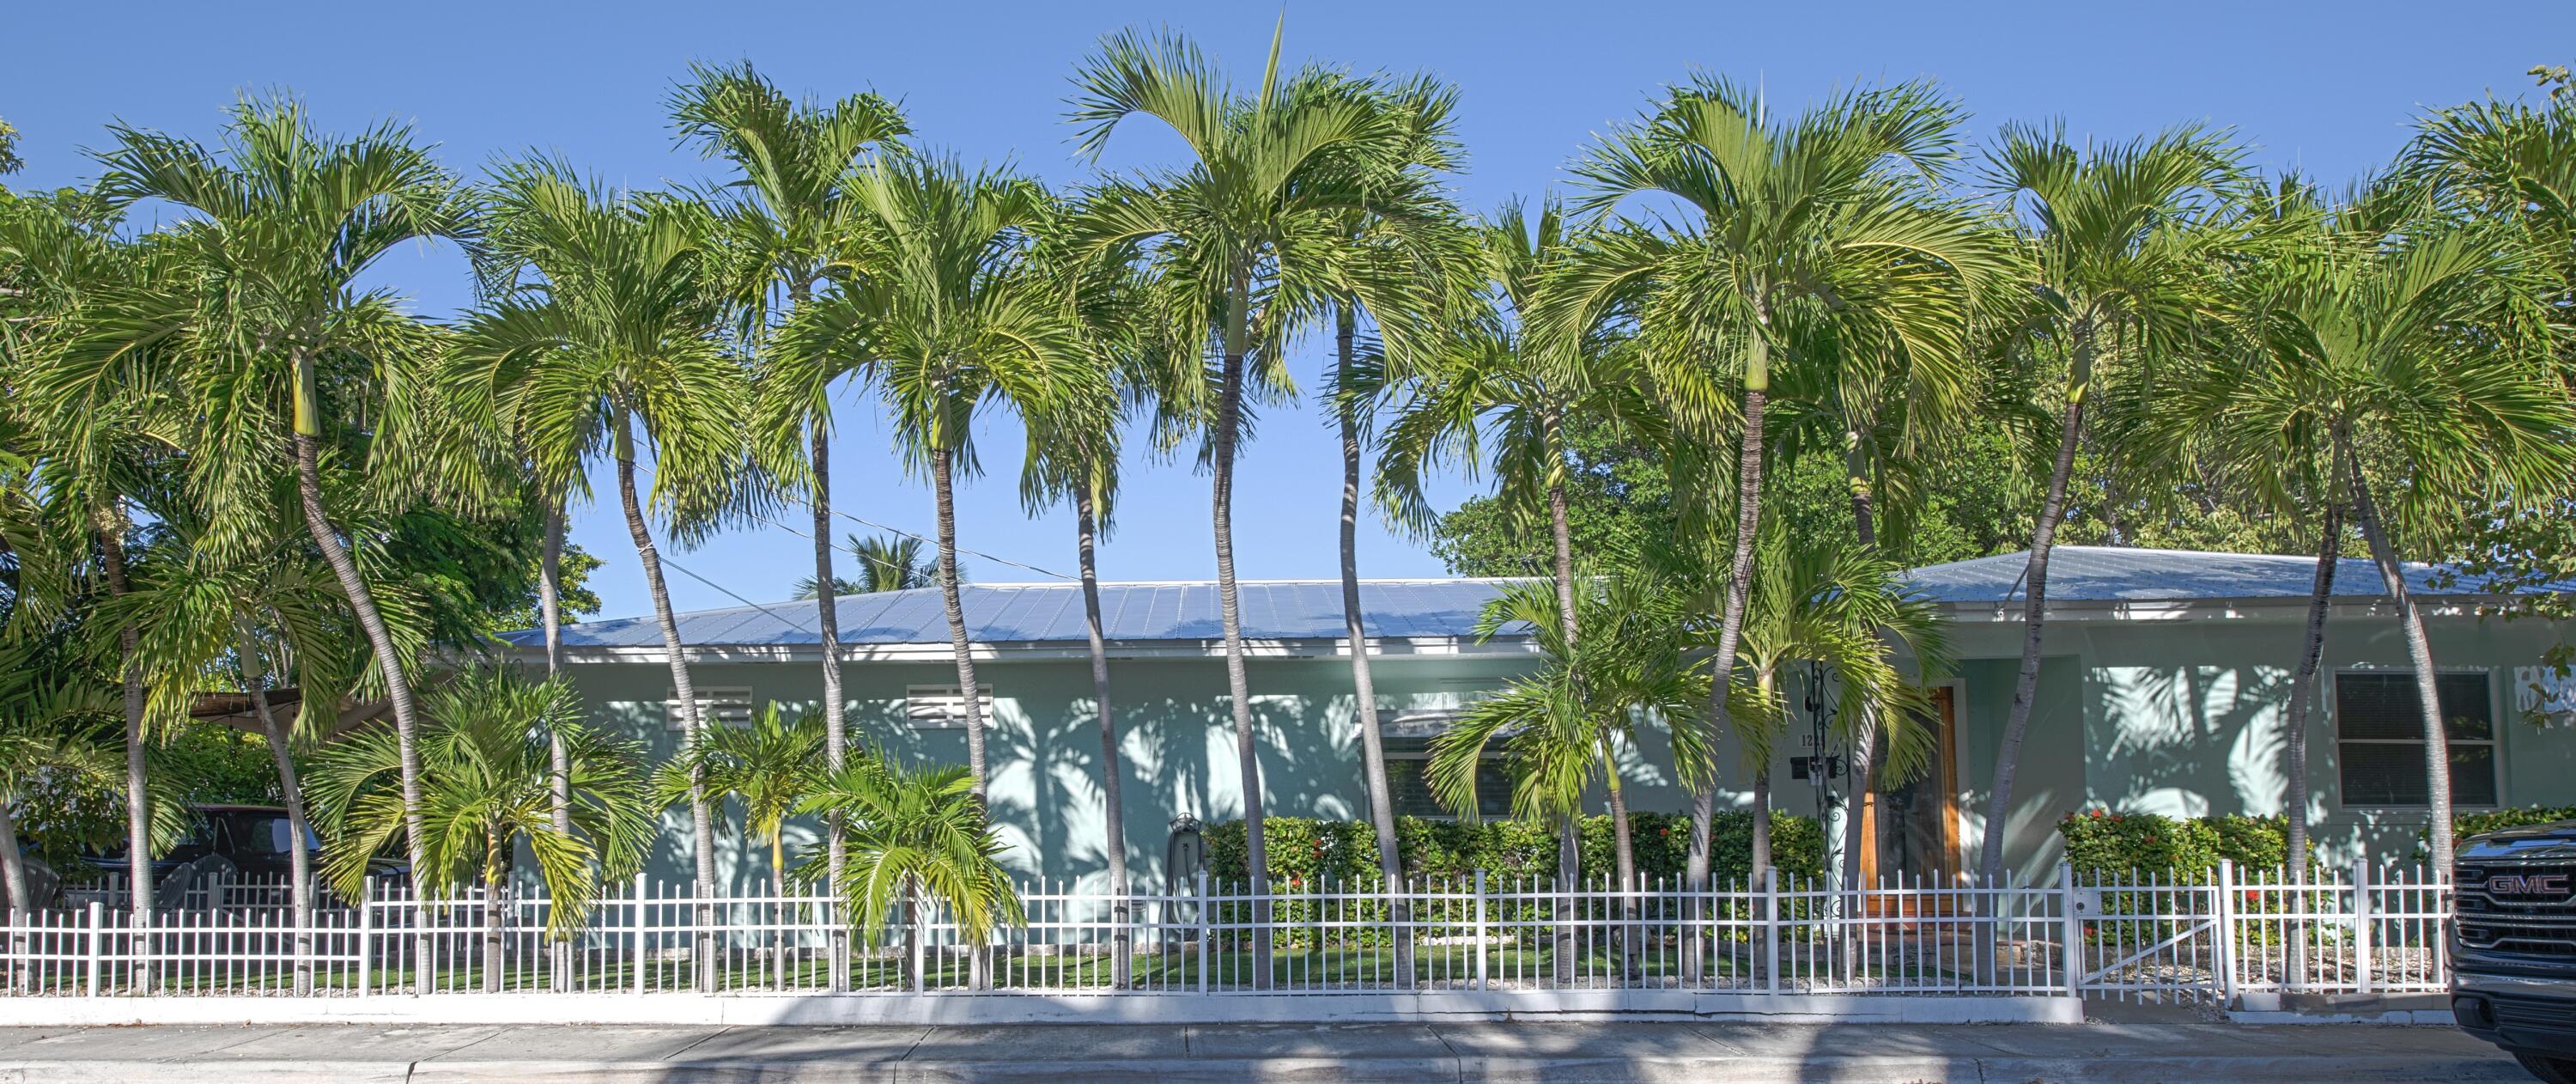 a view of a palm trees front of house with wooden fence